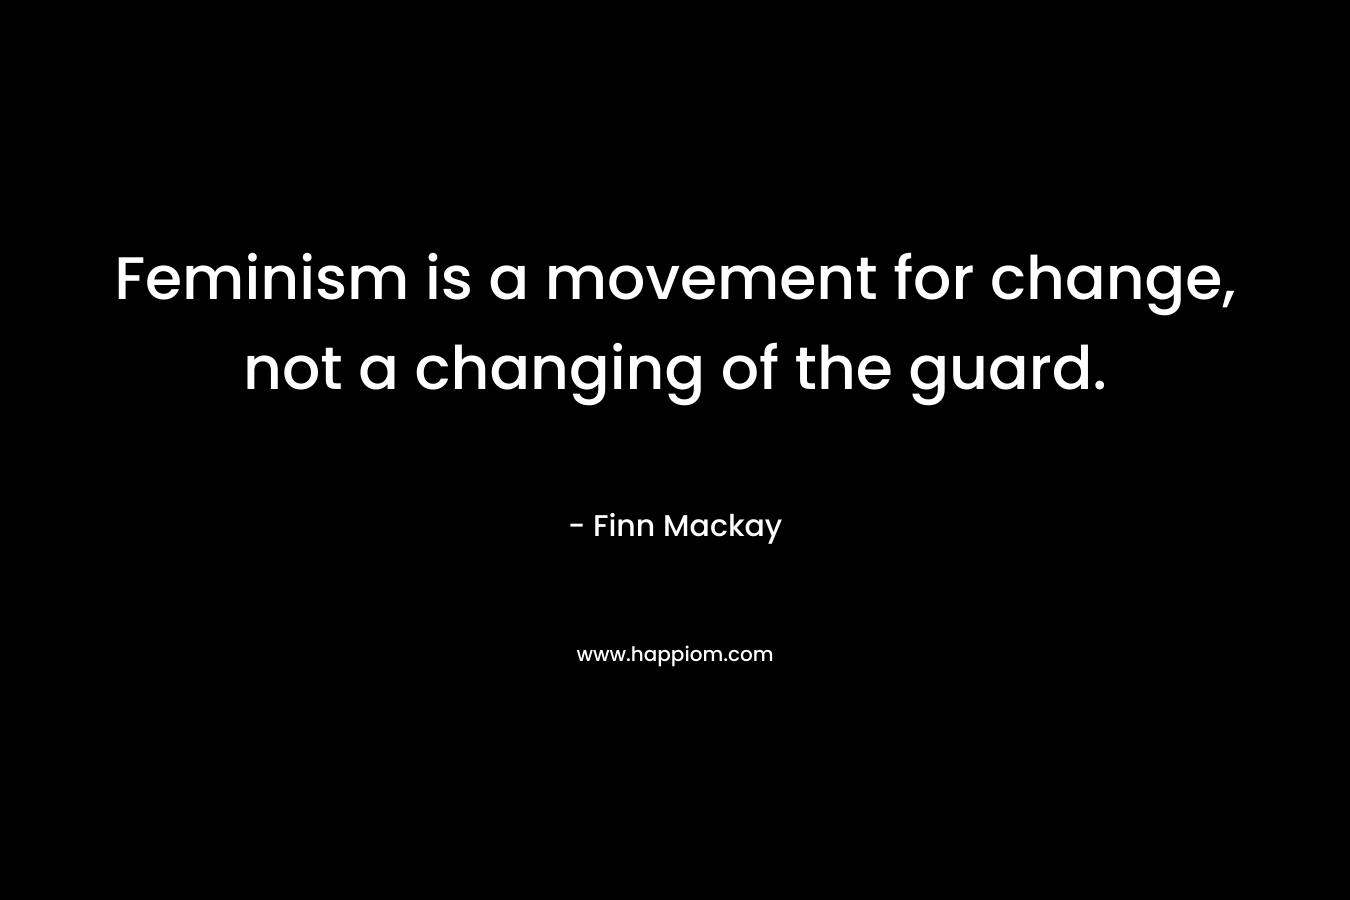 Feminism is a movement for change, not a changing of the guard. – Finn Mackay